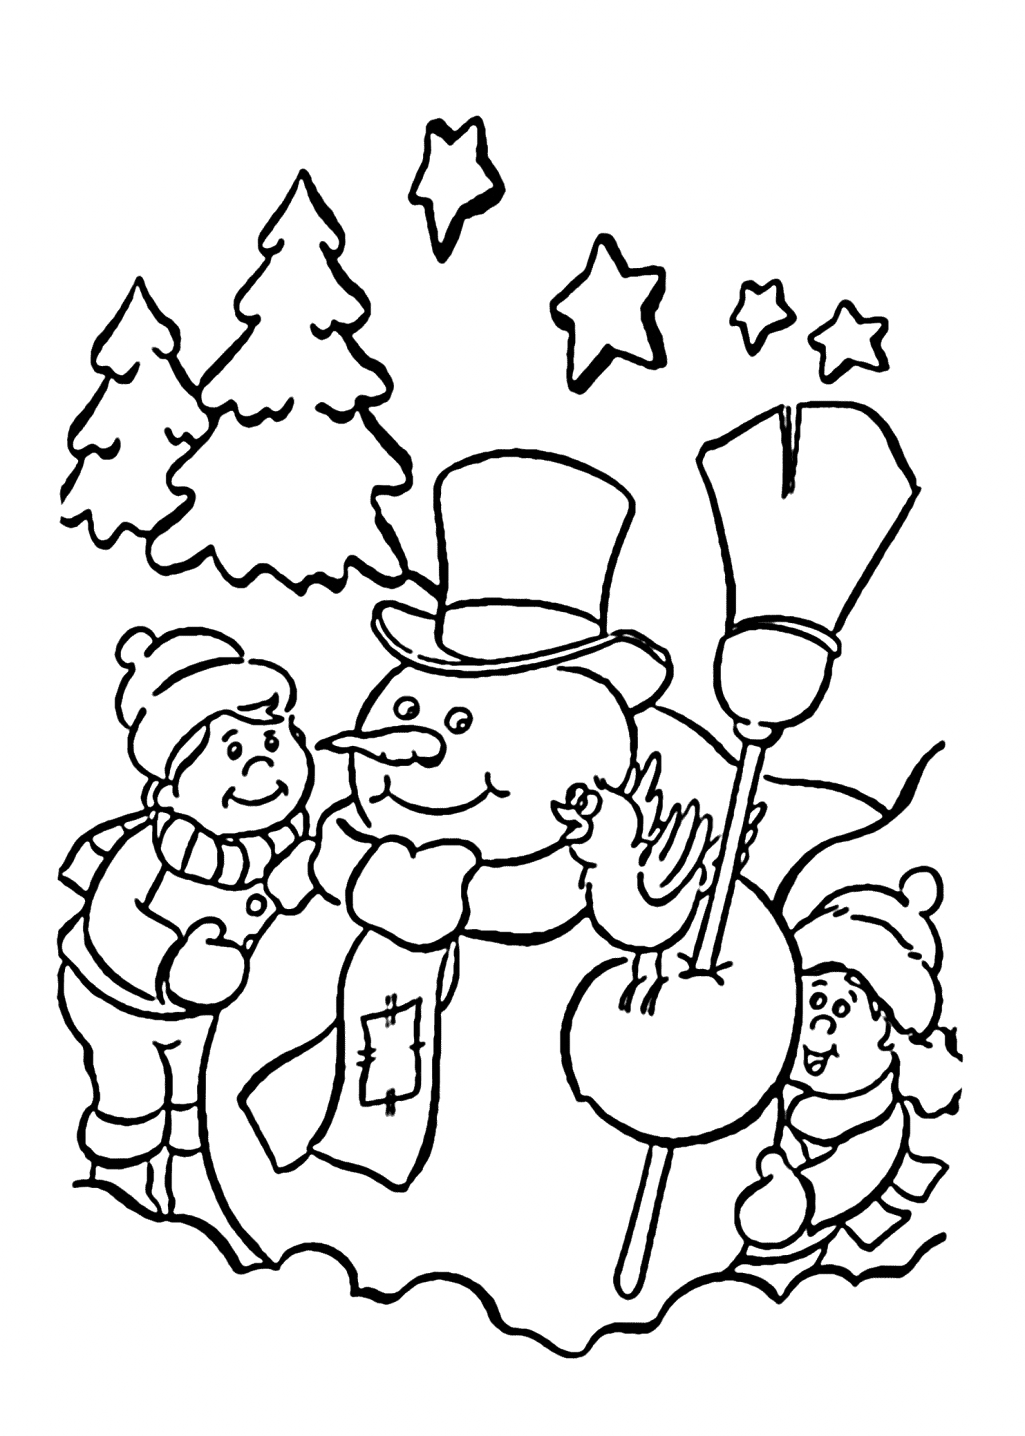 Printable Grandparents Day Coloring Page